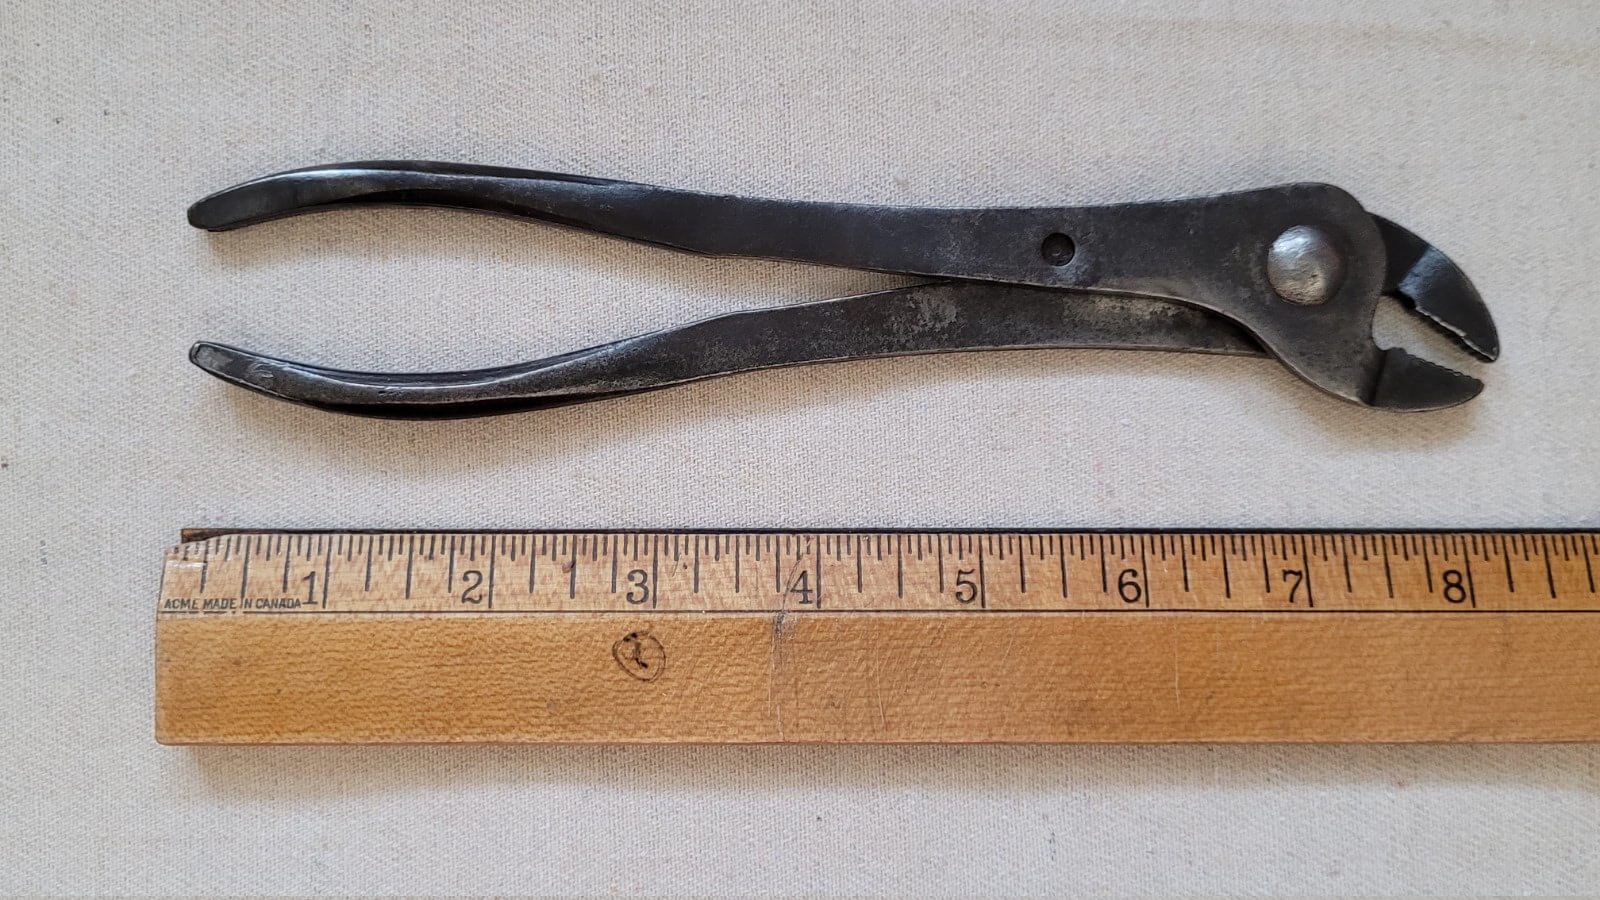 Vintage Lectrolite Corp Battery Terminal Pliers Defiance Ohio Made in USA Collectible Tools